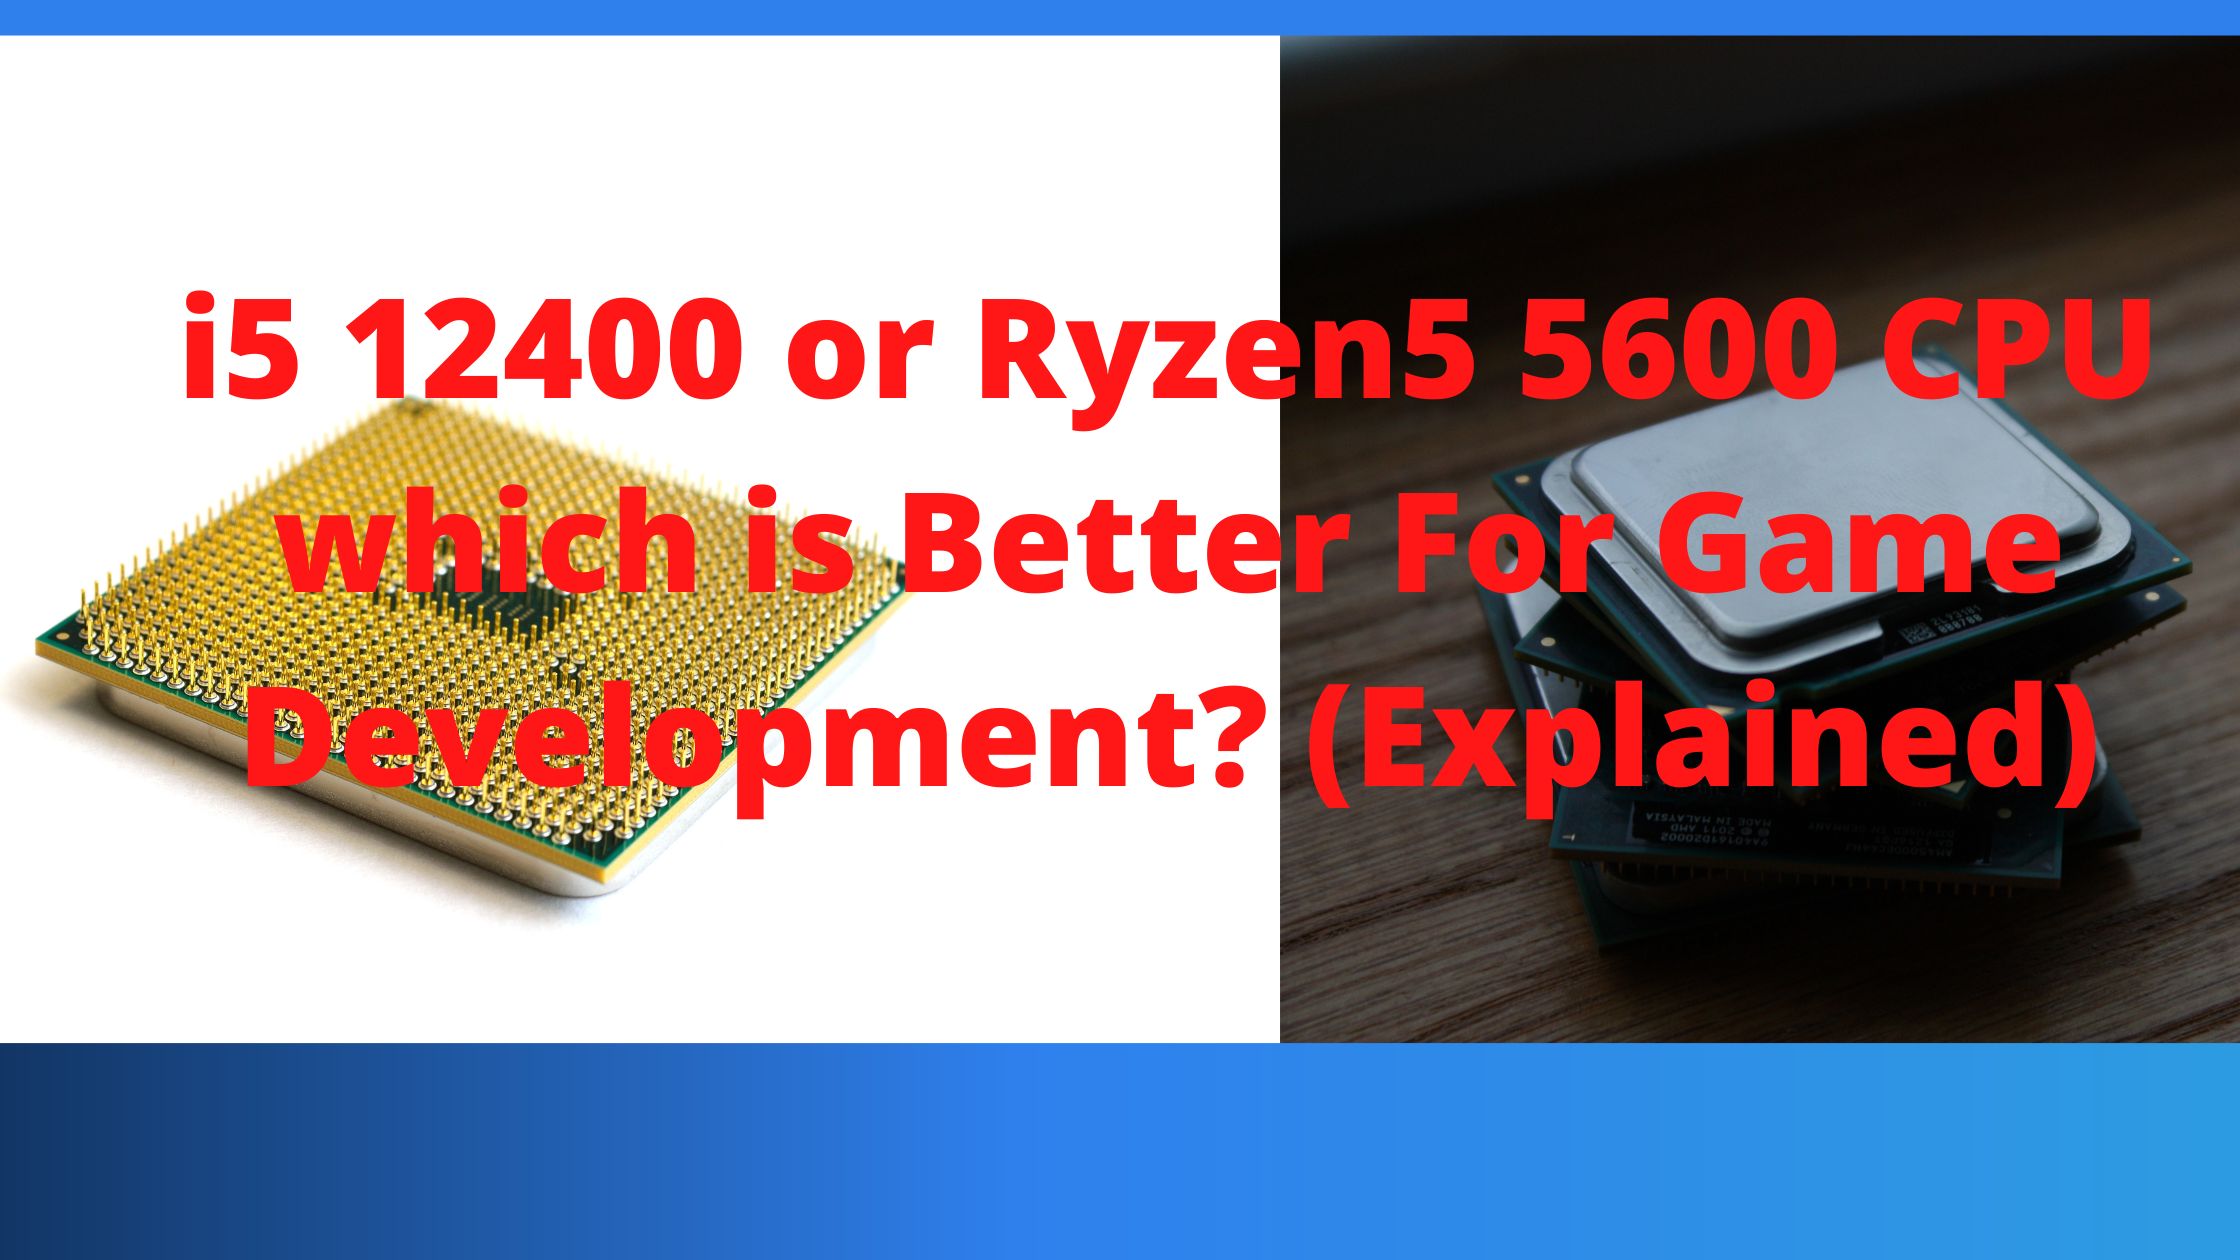 i5 12400 or Ryzen5 5600 CPU which is Better For Game Development? (Explained)